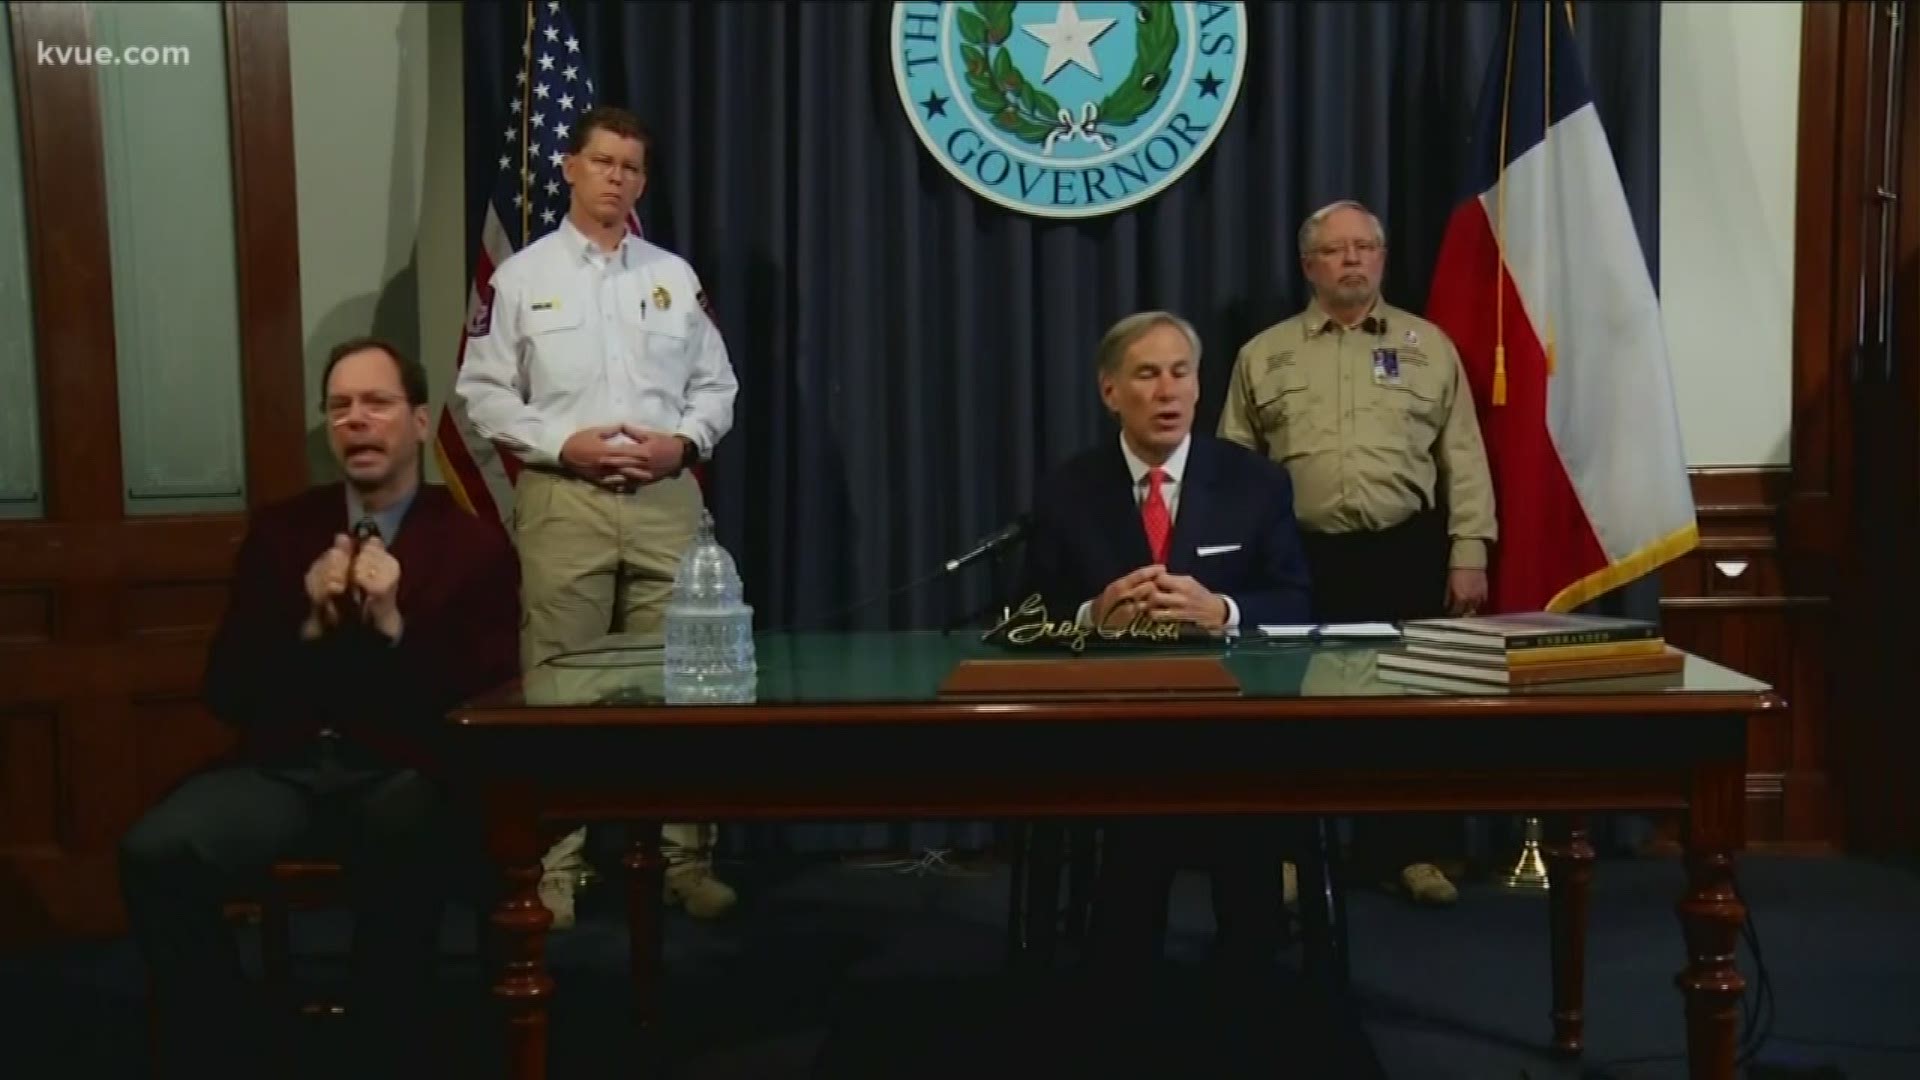 At a press conference Monday, Gov. Greg Abbott announced help for small businesses and discussed how the State is helping Texans battle COVID-19.